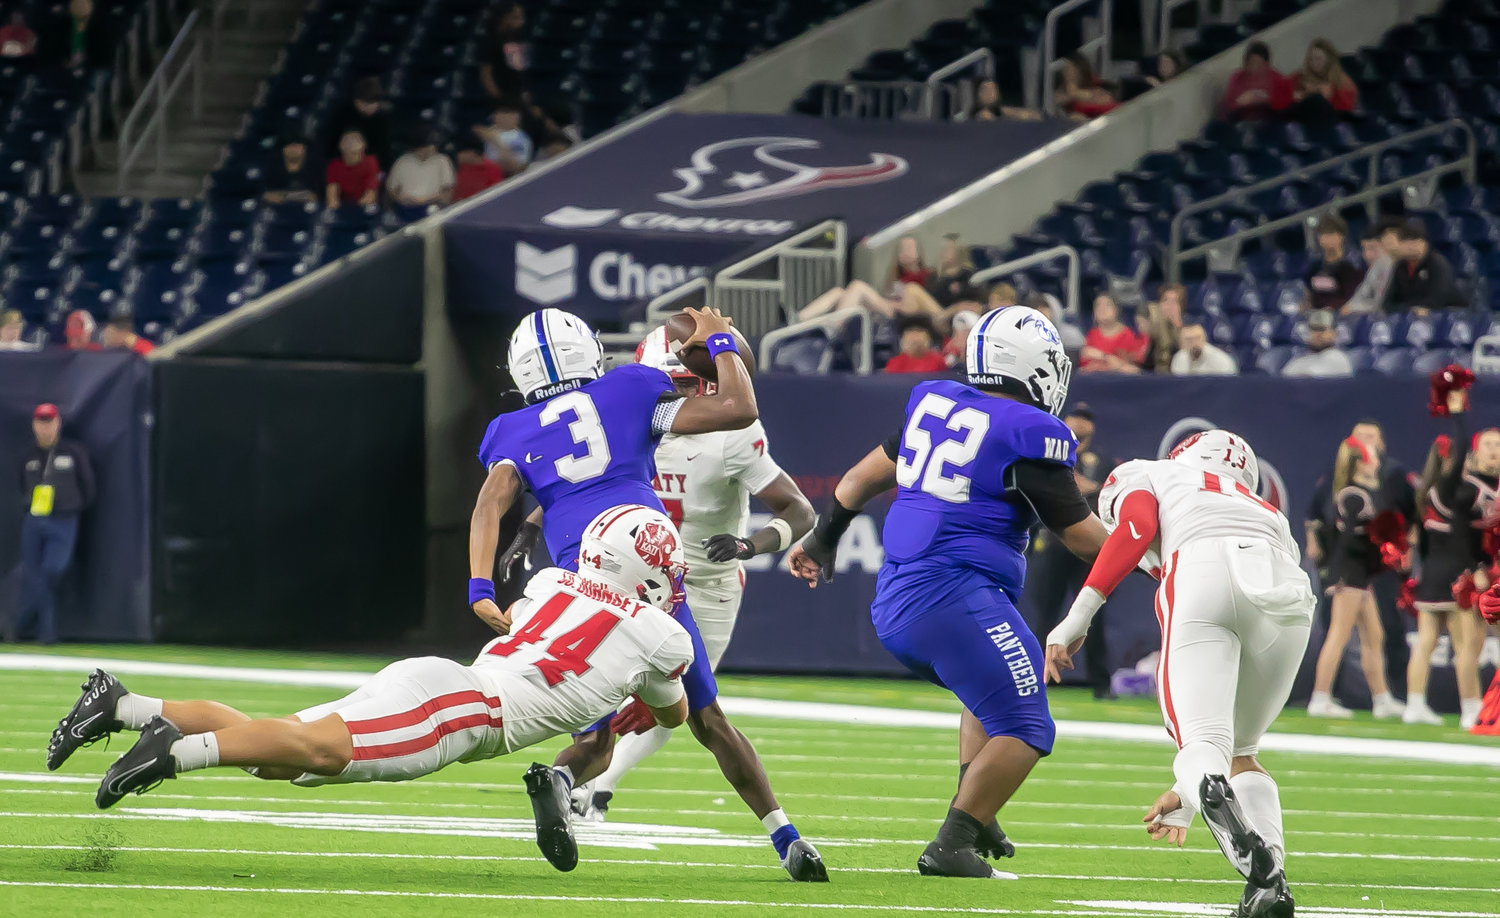 A Katy defenders brings down a C.E. King ballcarrier during Friday's Class 6A-Divison II Region III Final between Katy and C.E. King at NRG Stadium.